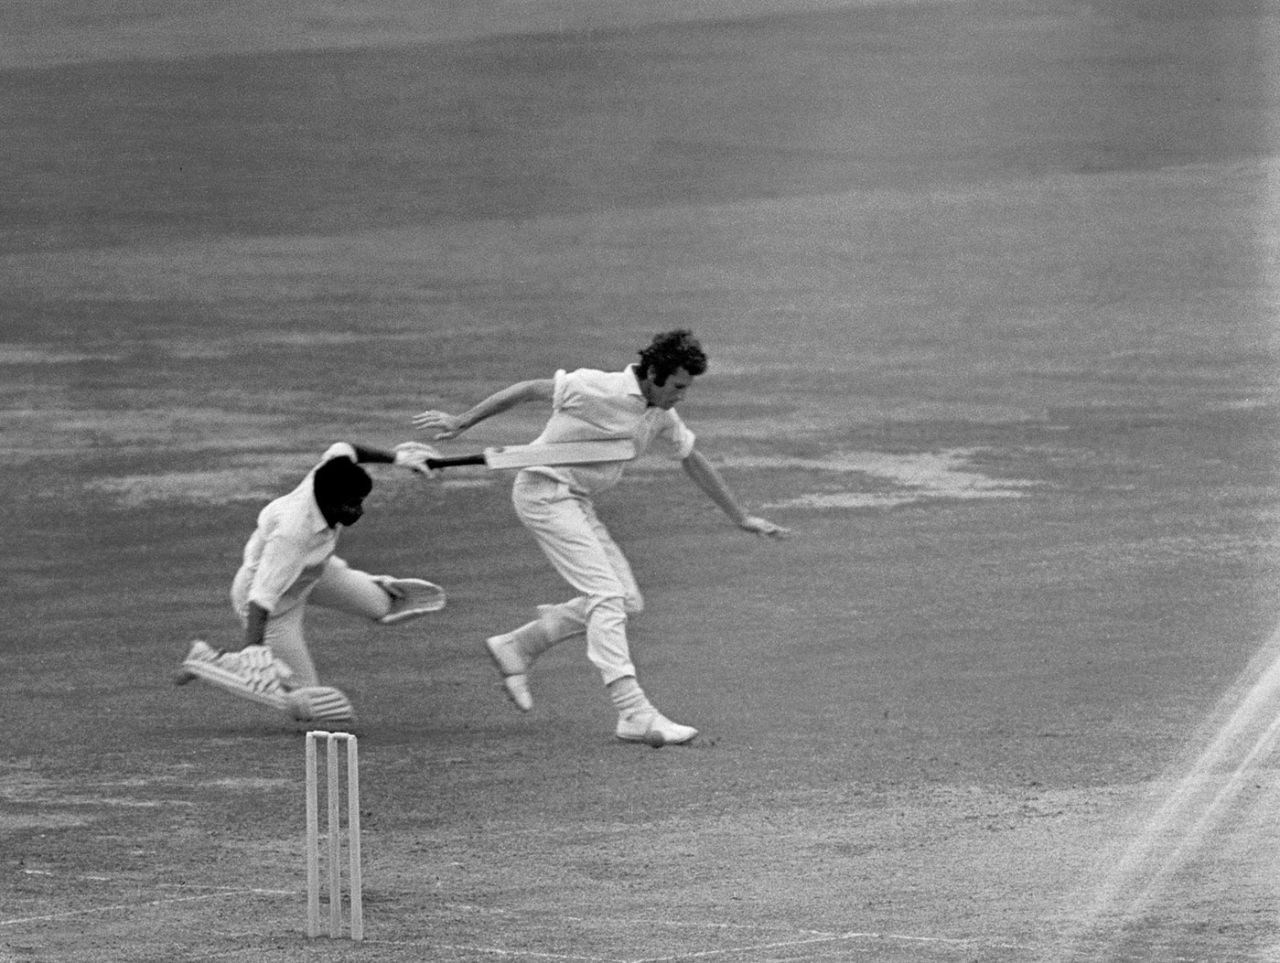 John Snow and Sunil Gavaskar collide, England v India, first Test, day two, Lord's, July 23, 1971